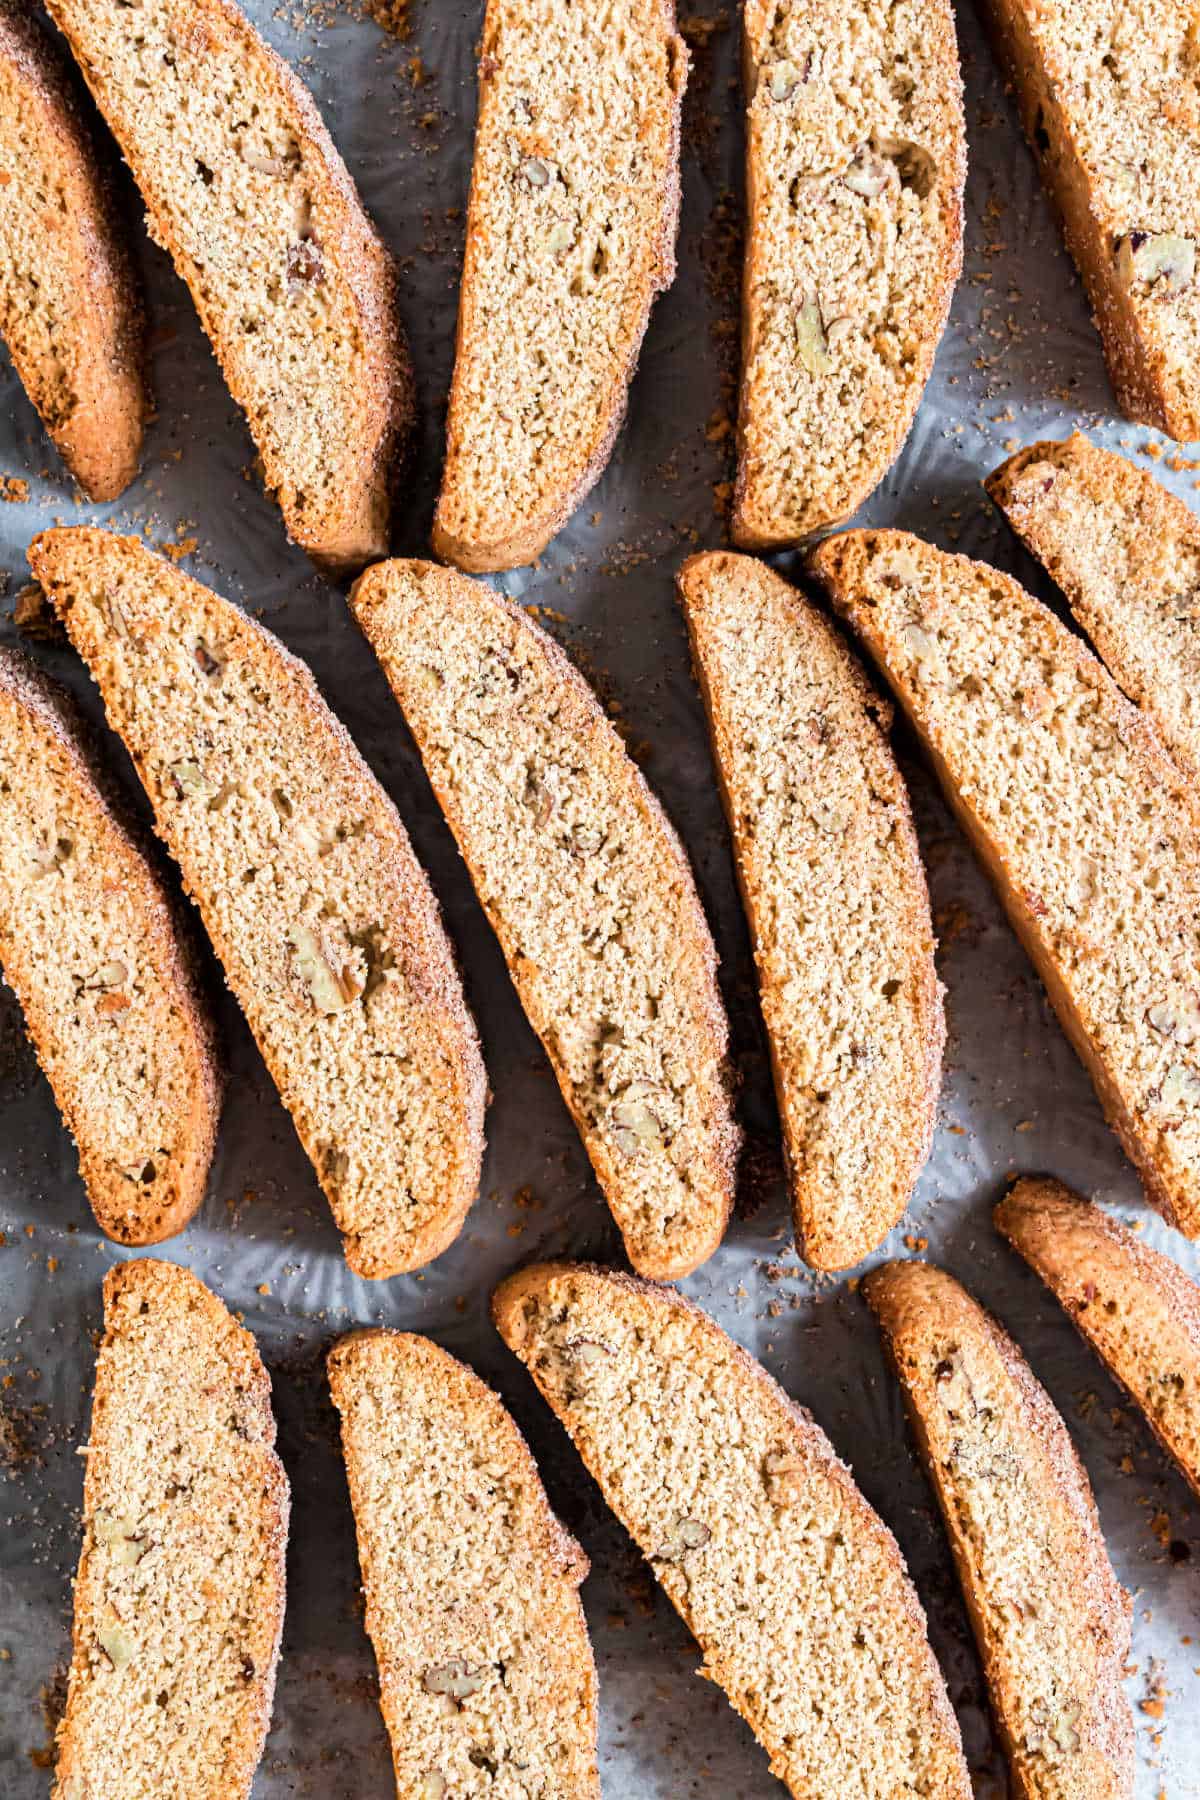 Biscotti baked on a cookie sheet pan.